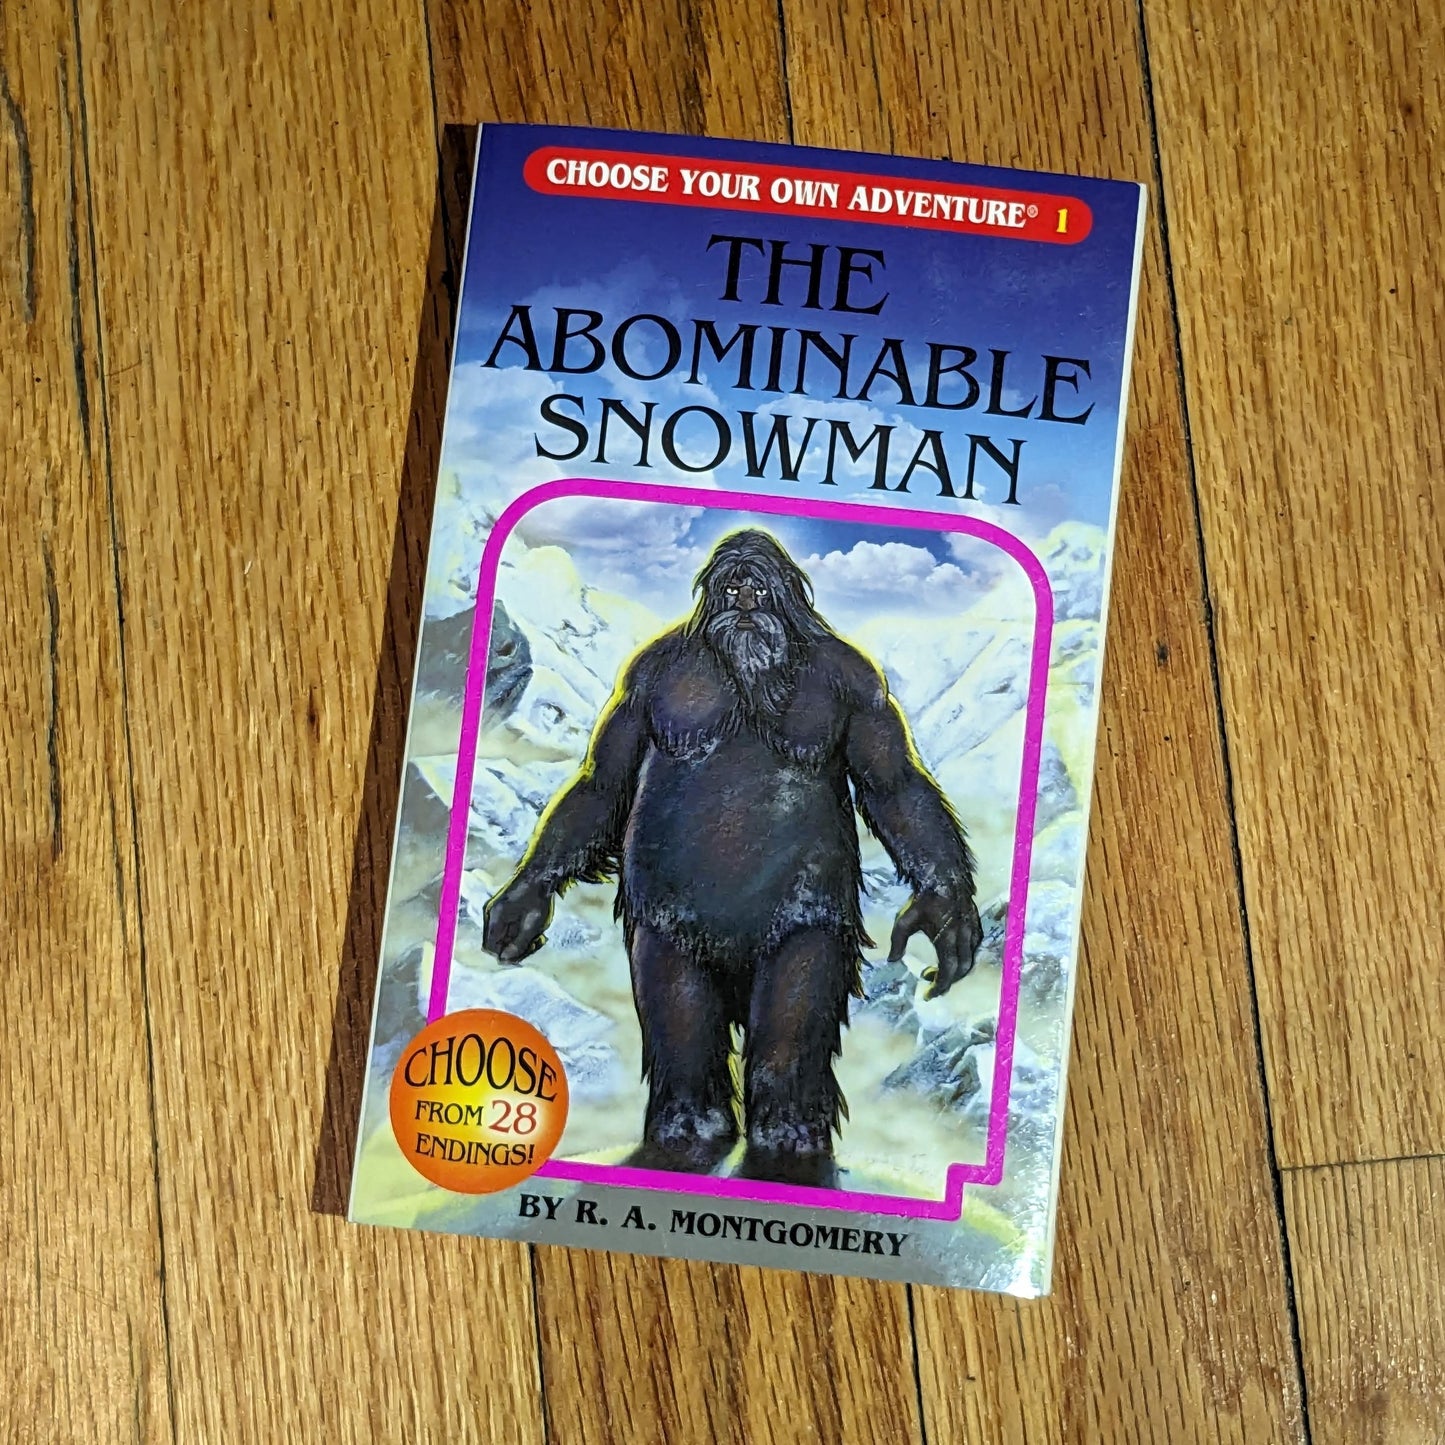 Abominable Snowman, The (Choose Your Own Adventure #1) by R. A. Montgomery - Asylum Books